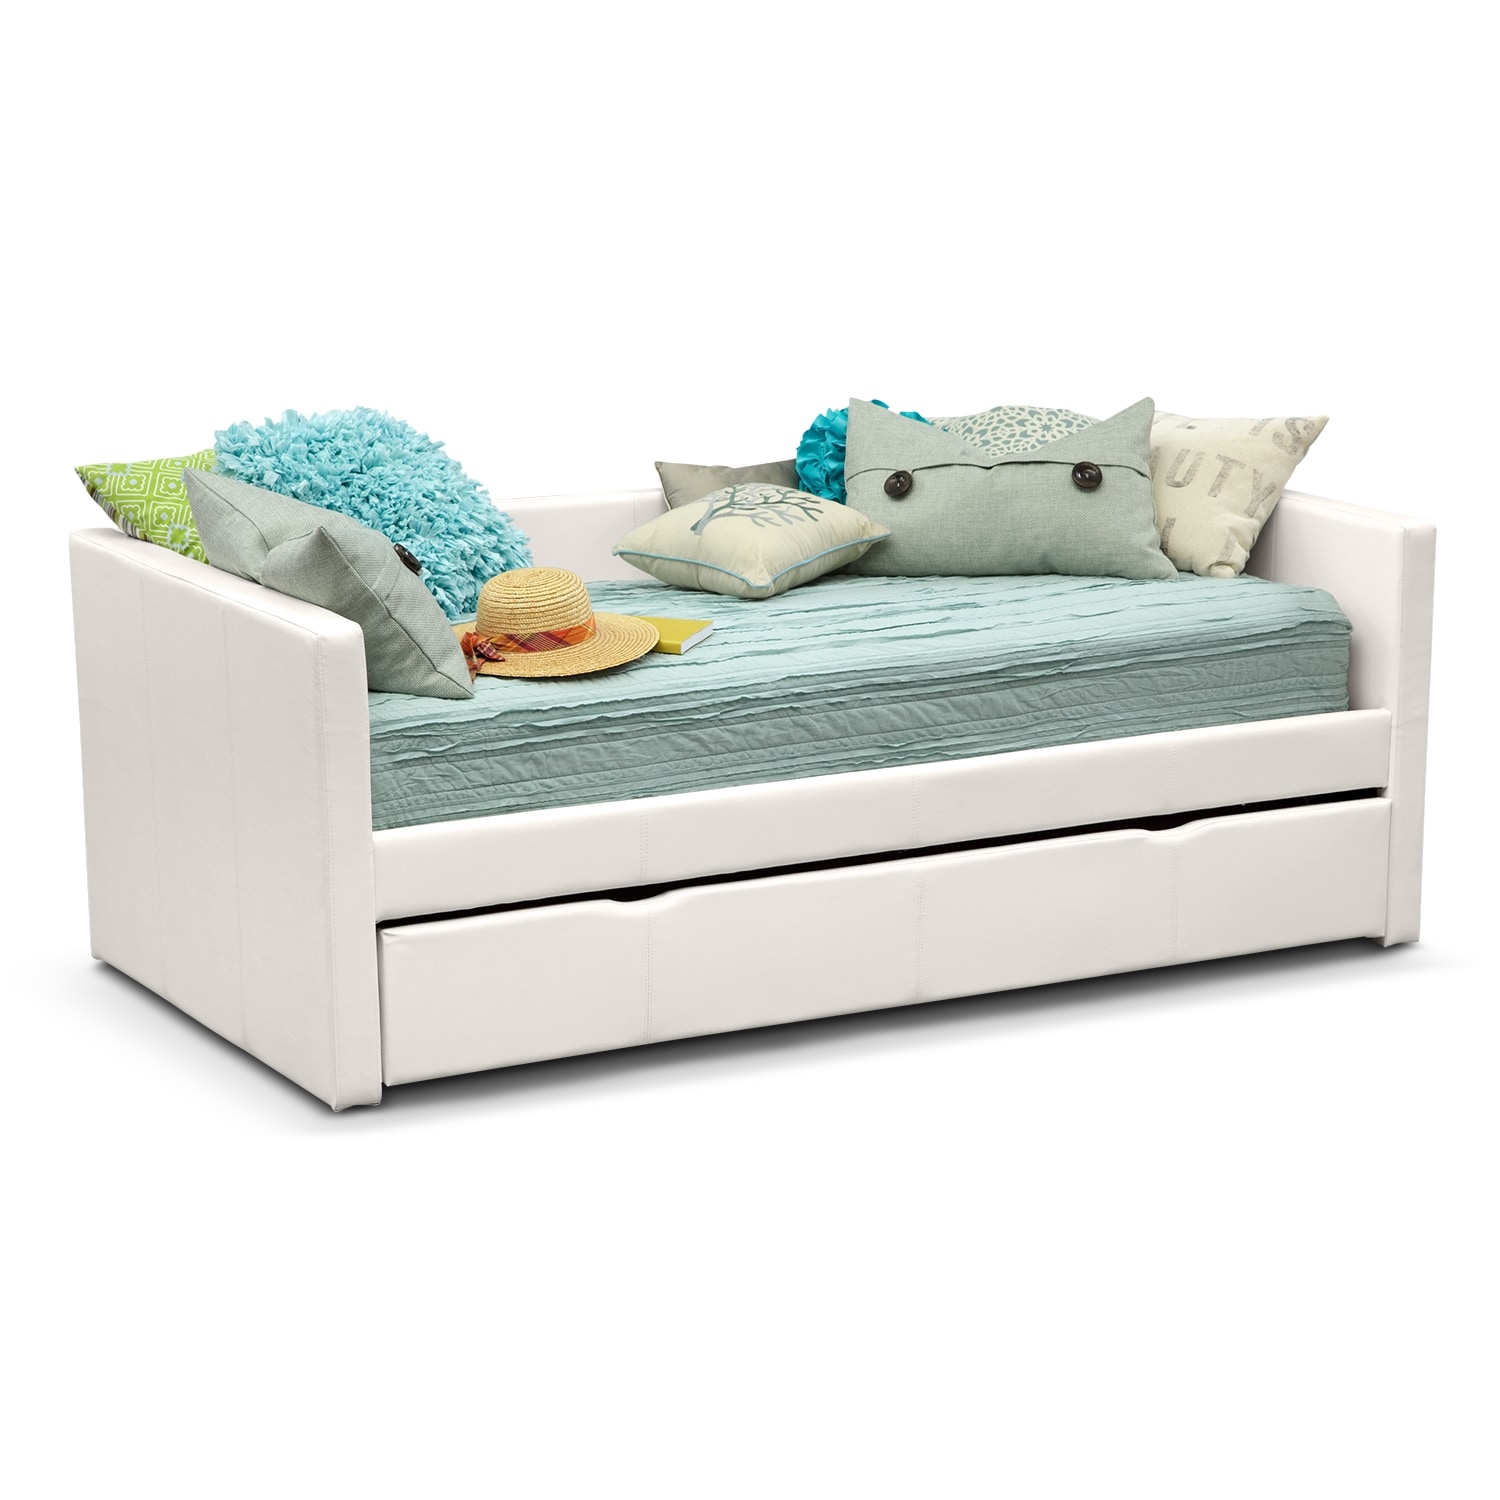 Kids daybeds